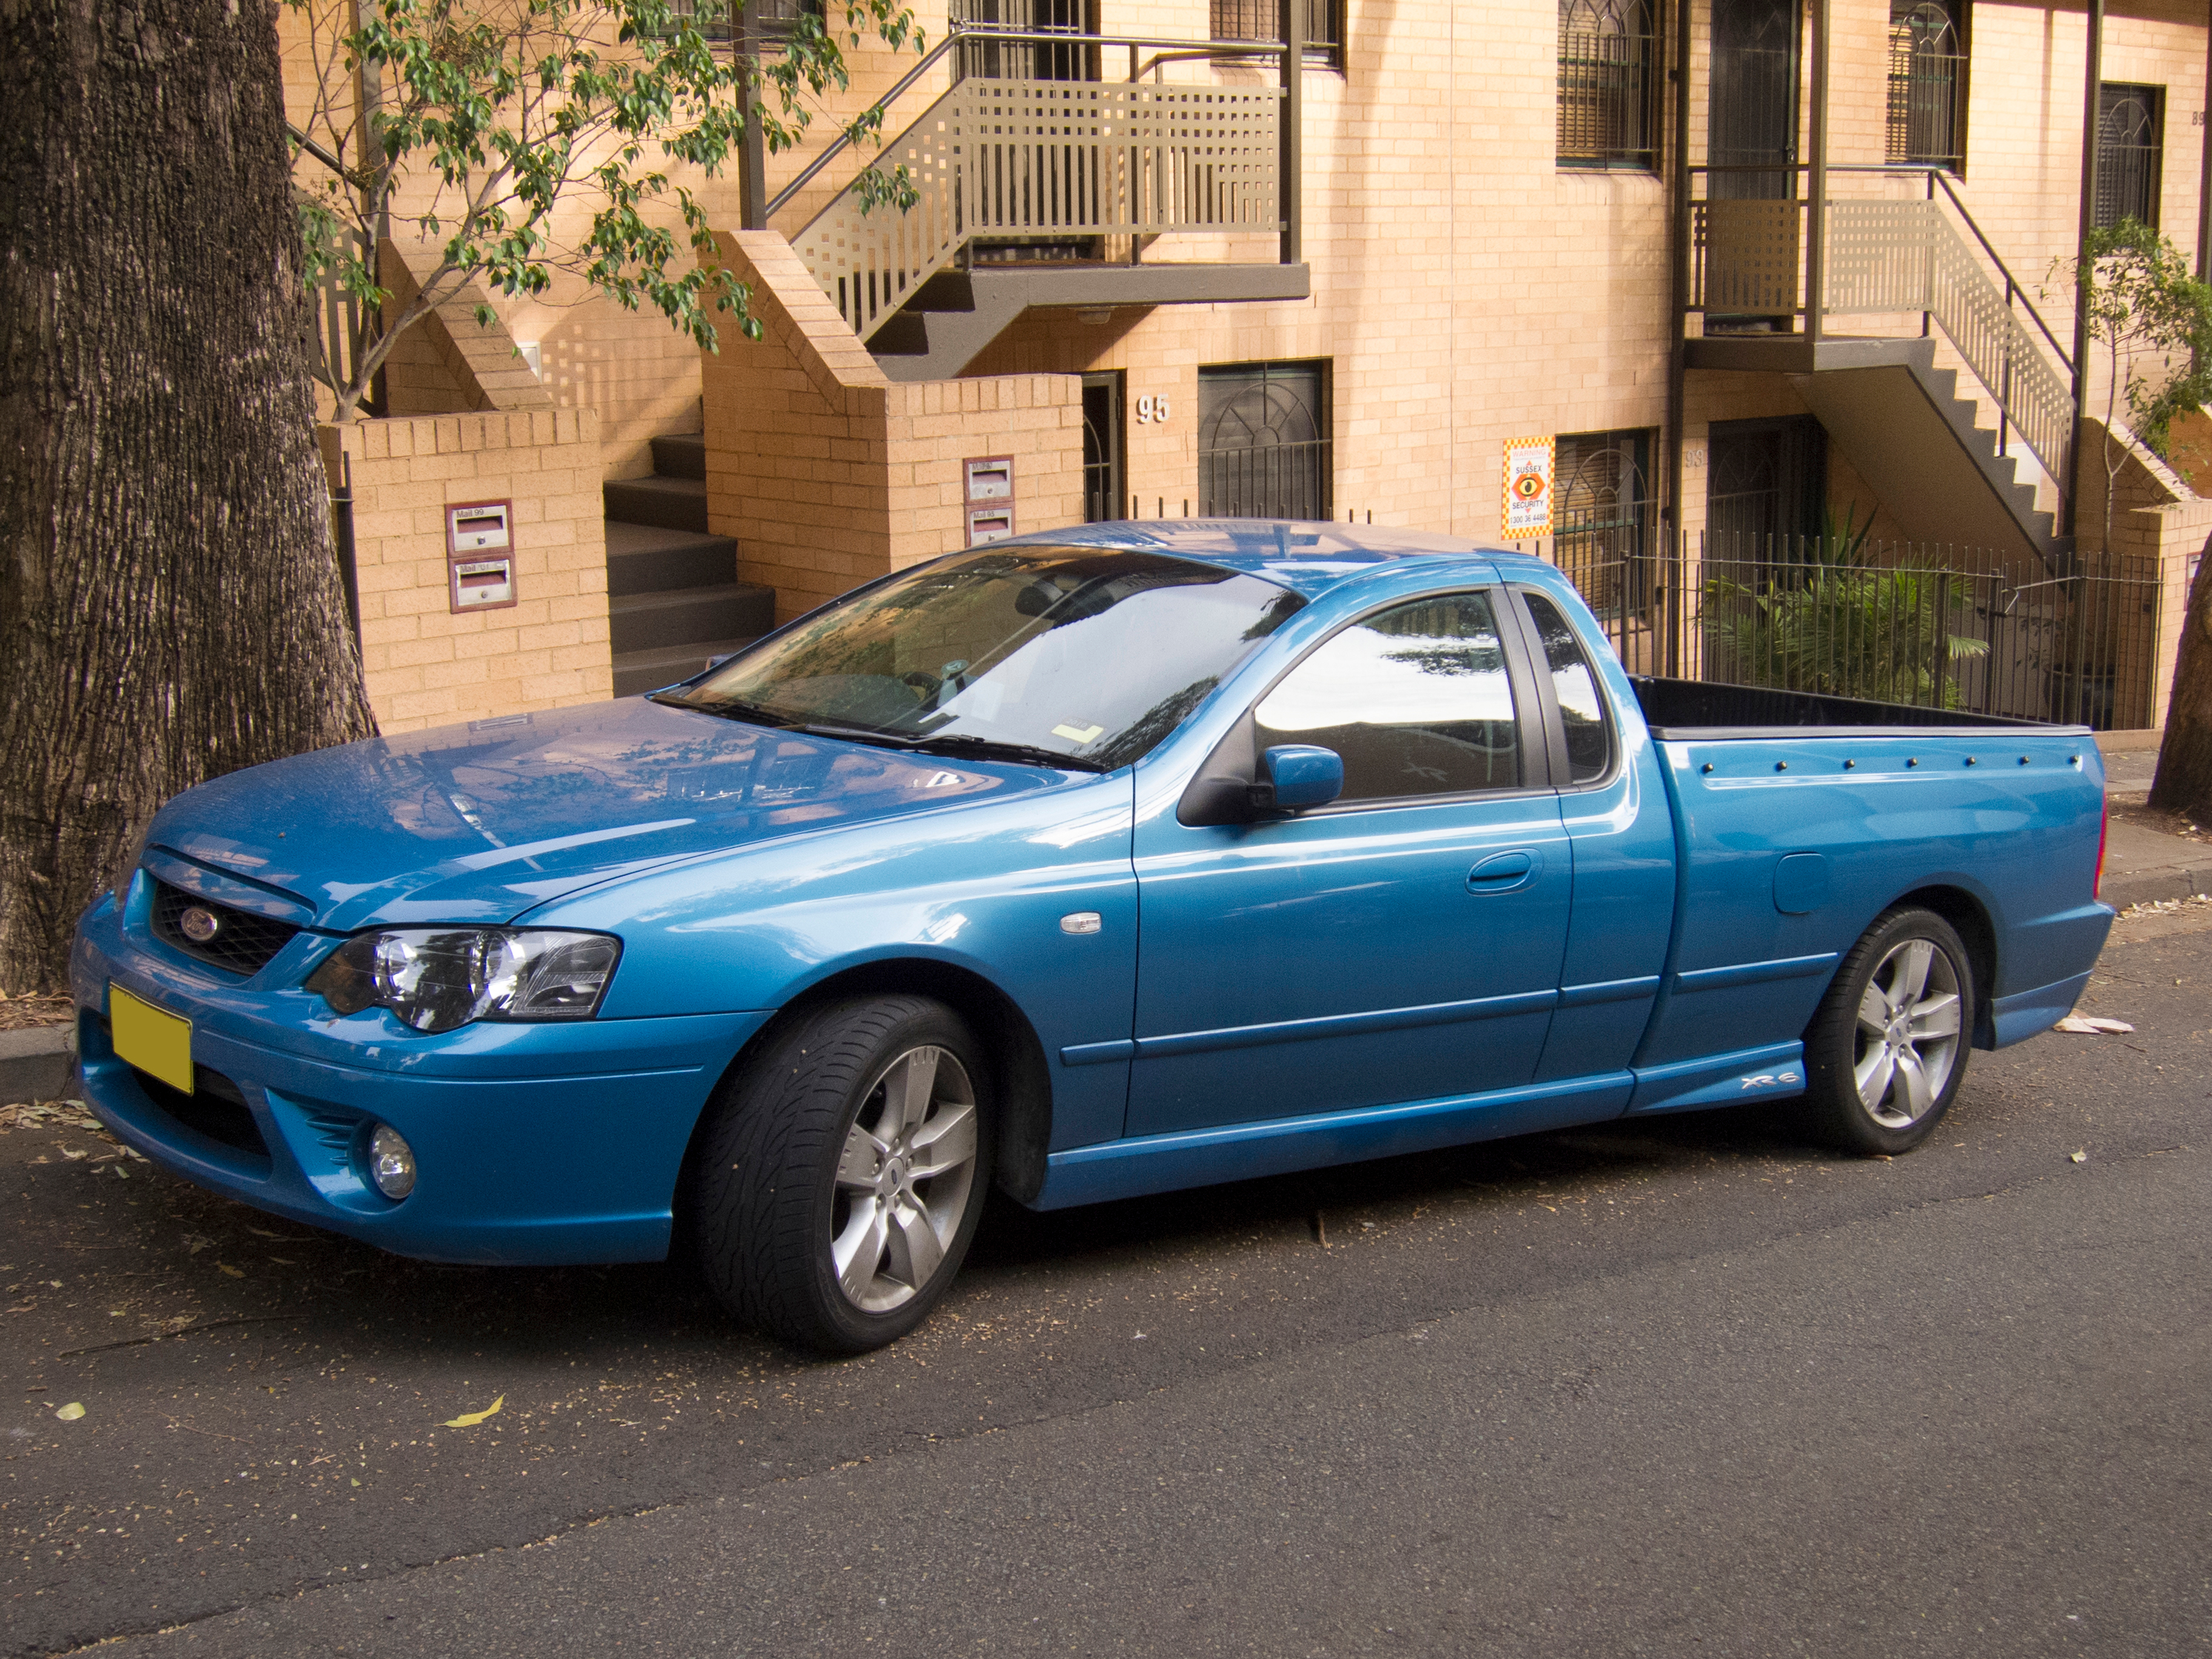 Blue holden ute parked on road